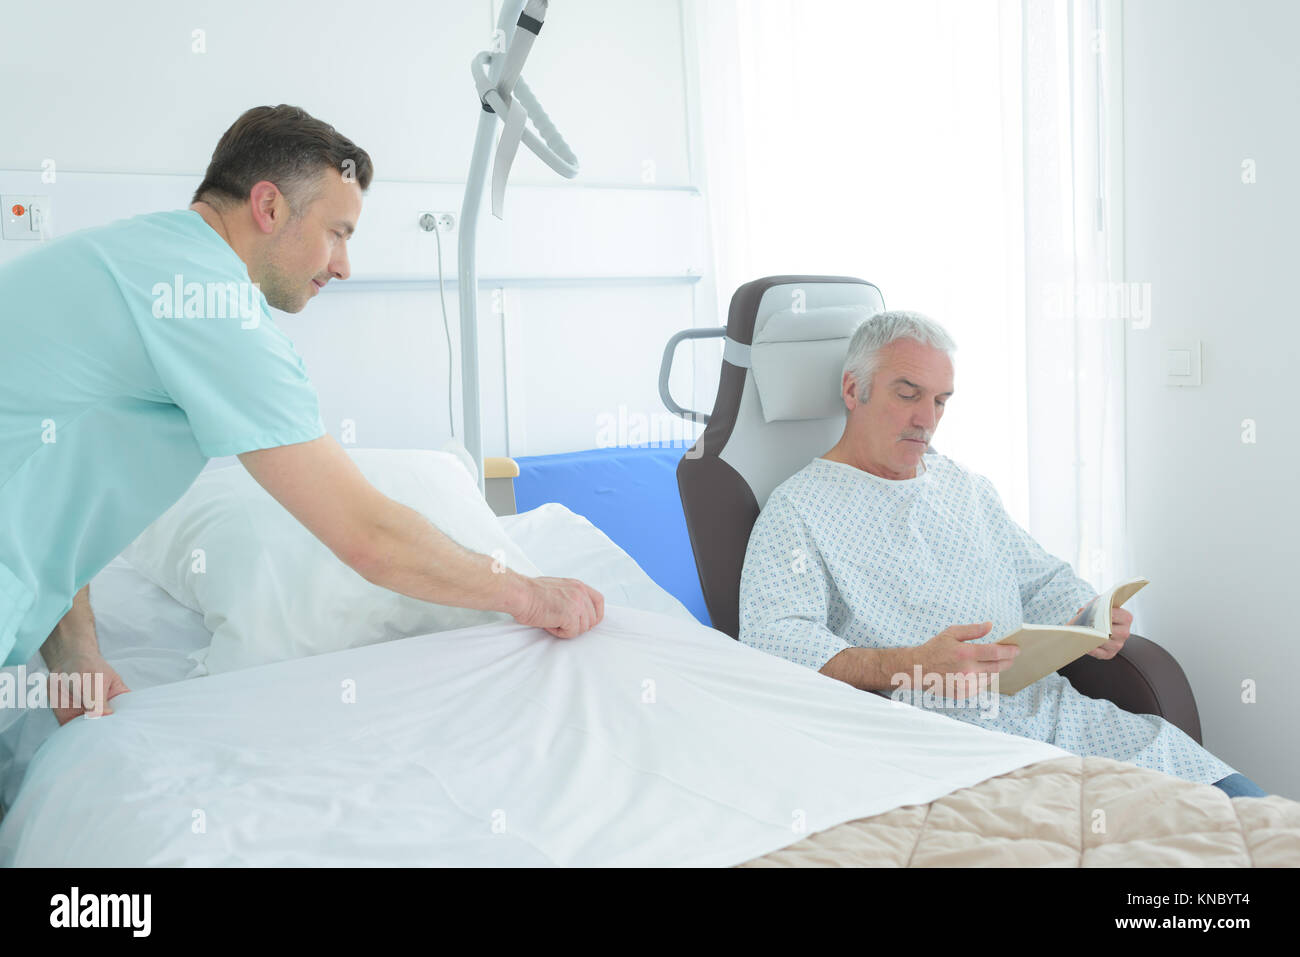 Auxiliary nurse making patient's bed Stock Photo